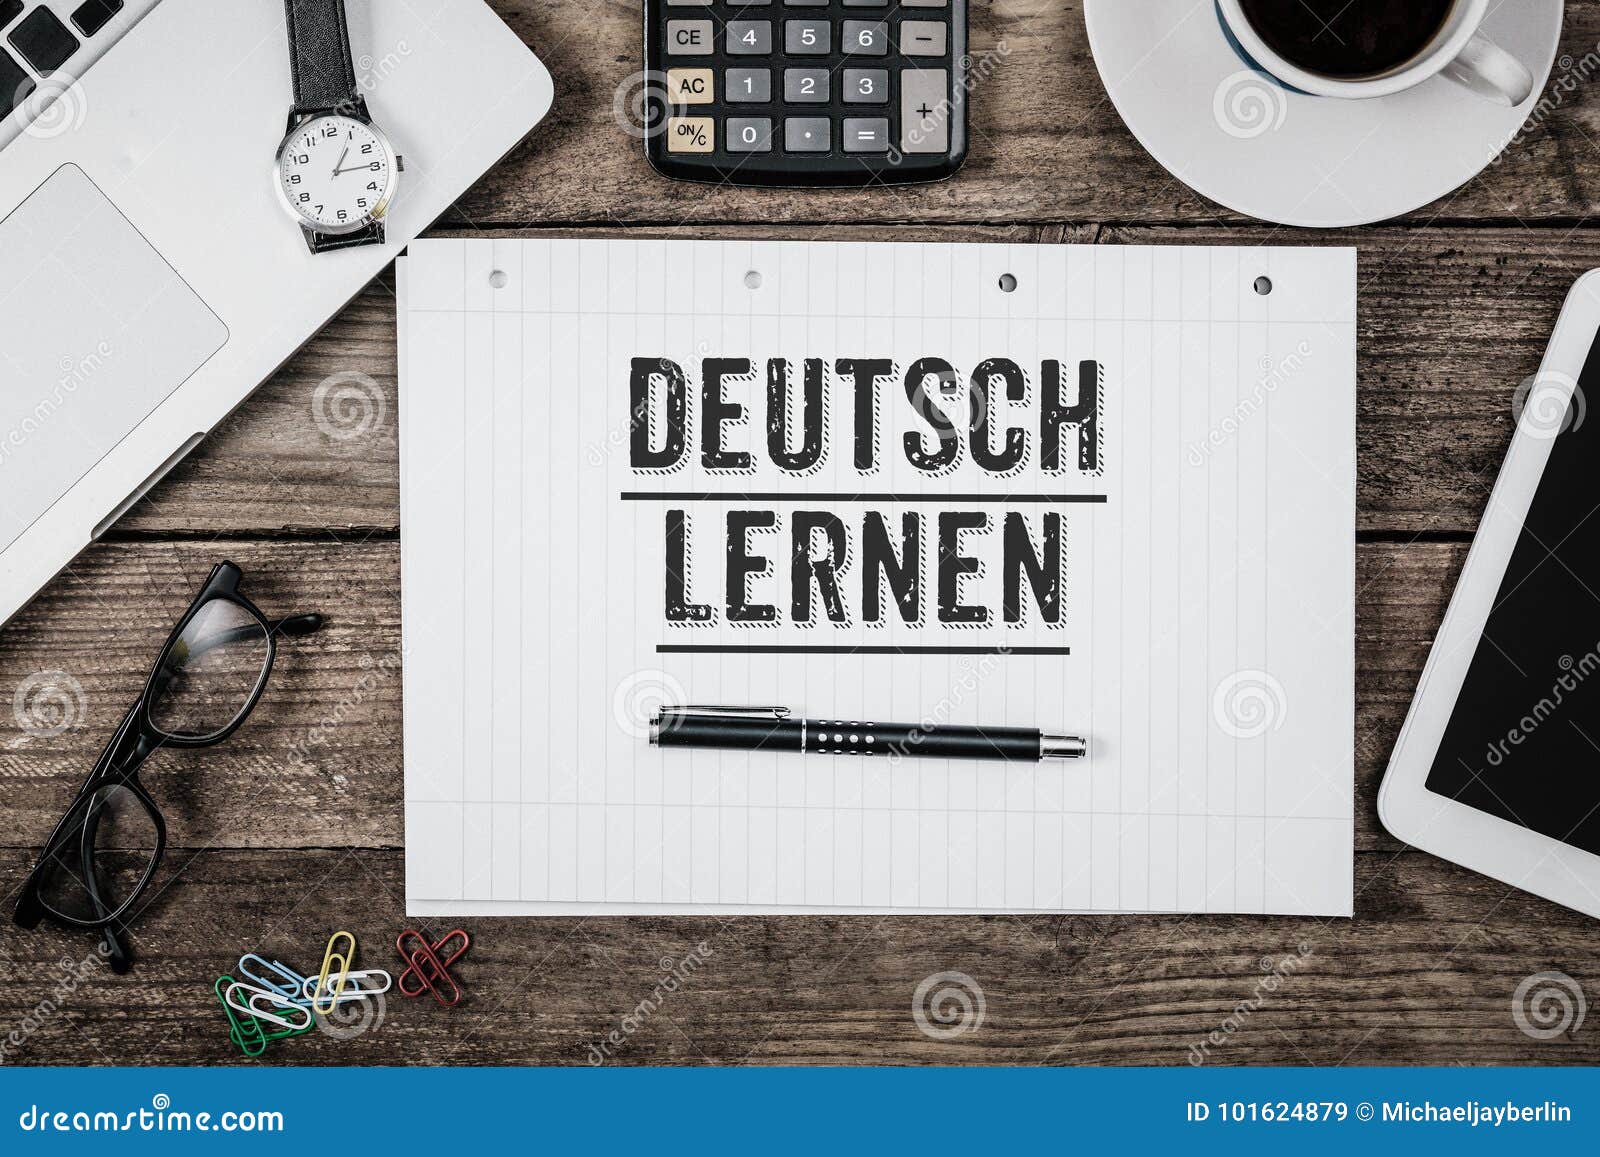 Learn German On Notepade At Office Desk With Computer Technology